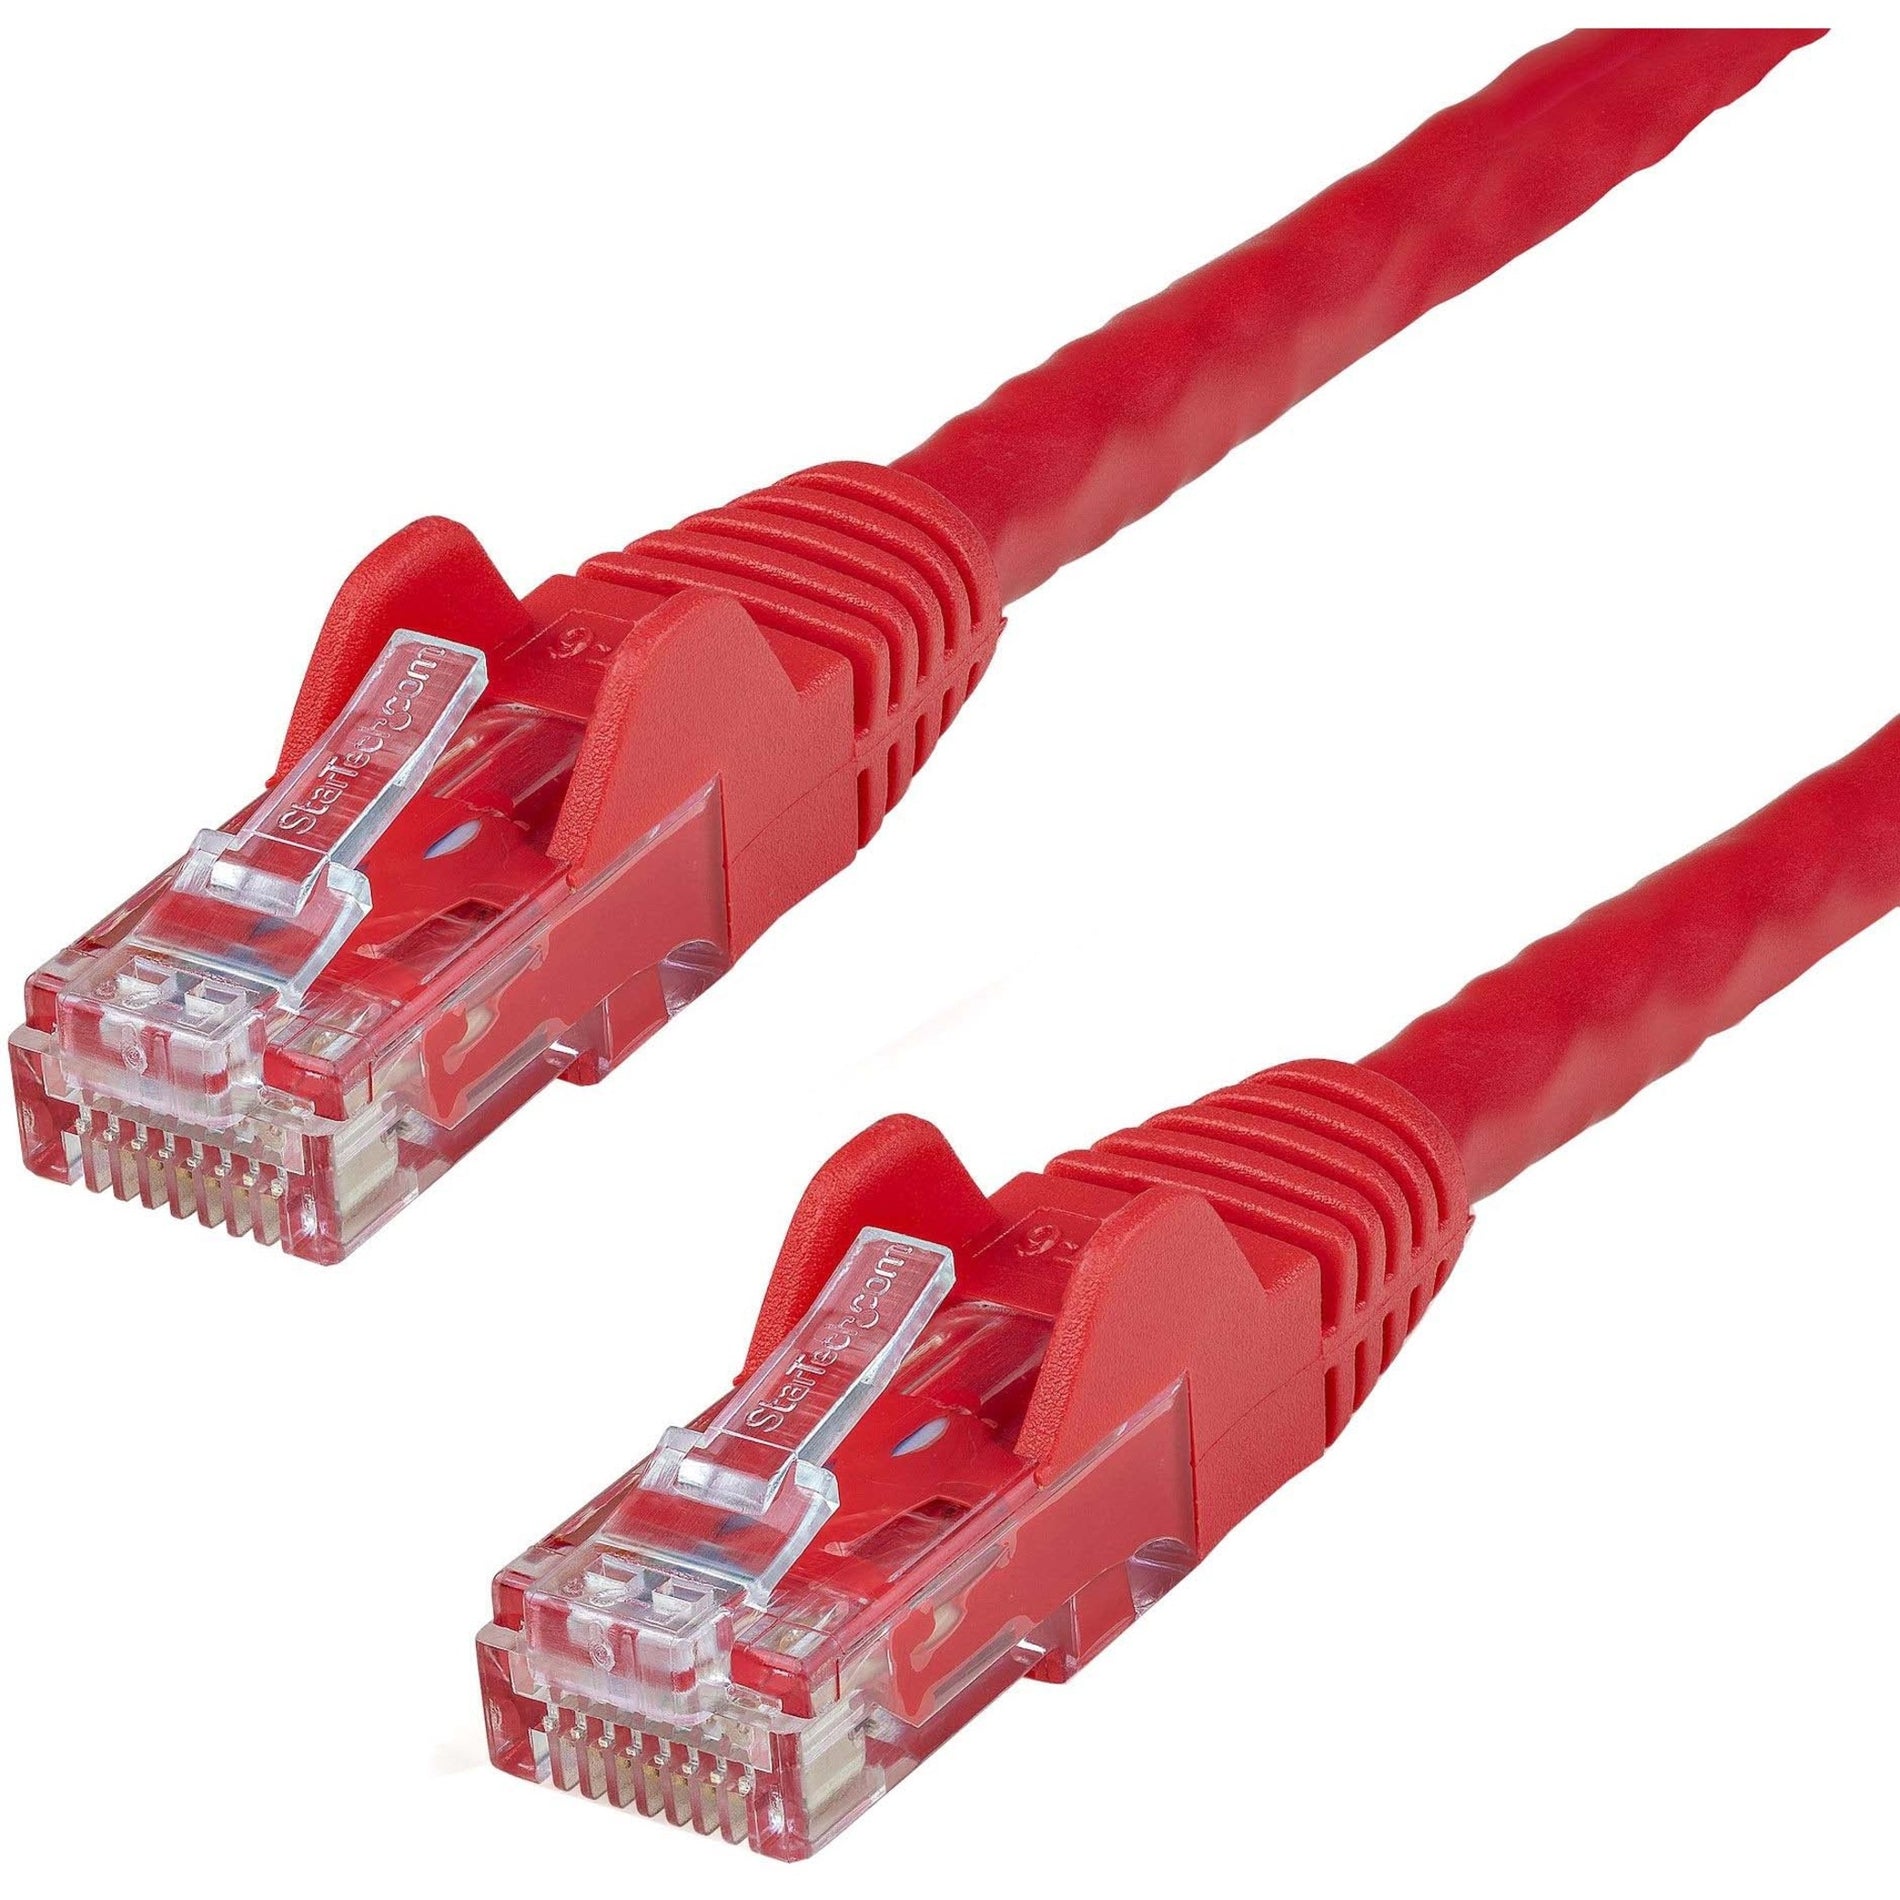 StarTech.com N6PATCH4RD Cat6 Patch Cable, 4ft Red Ethernet Cable, Snagless RJ45 Connectors